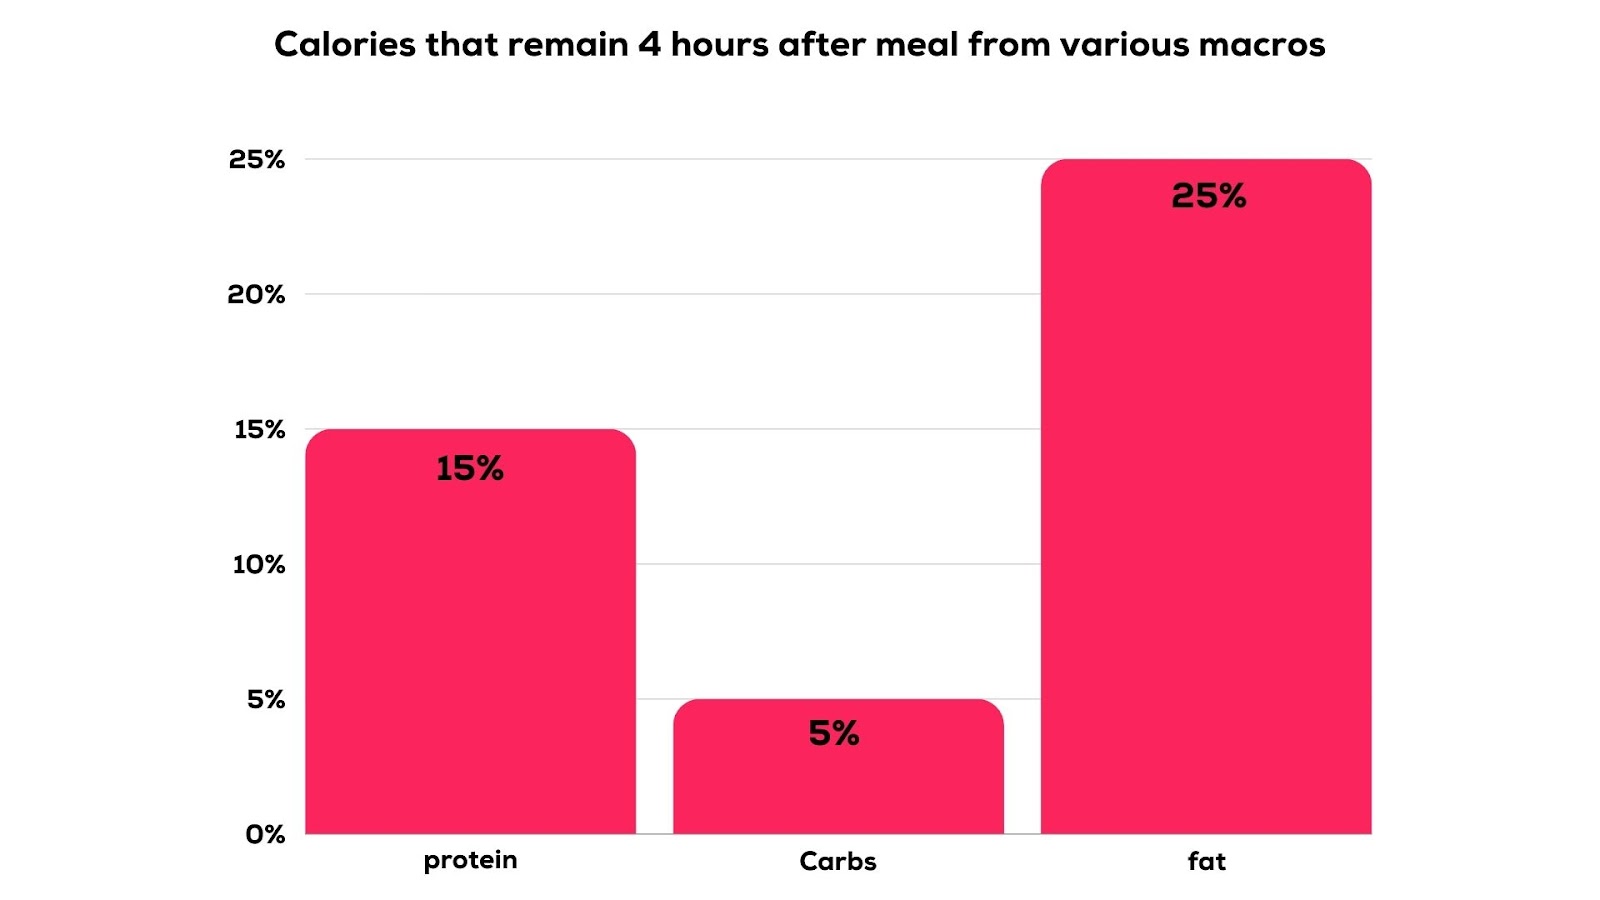 Why Am I Not Hungry in the Morning - Calories that remain 4 hours after meal from various macros